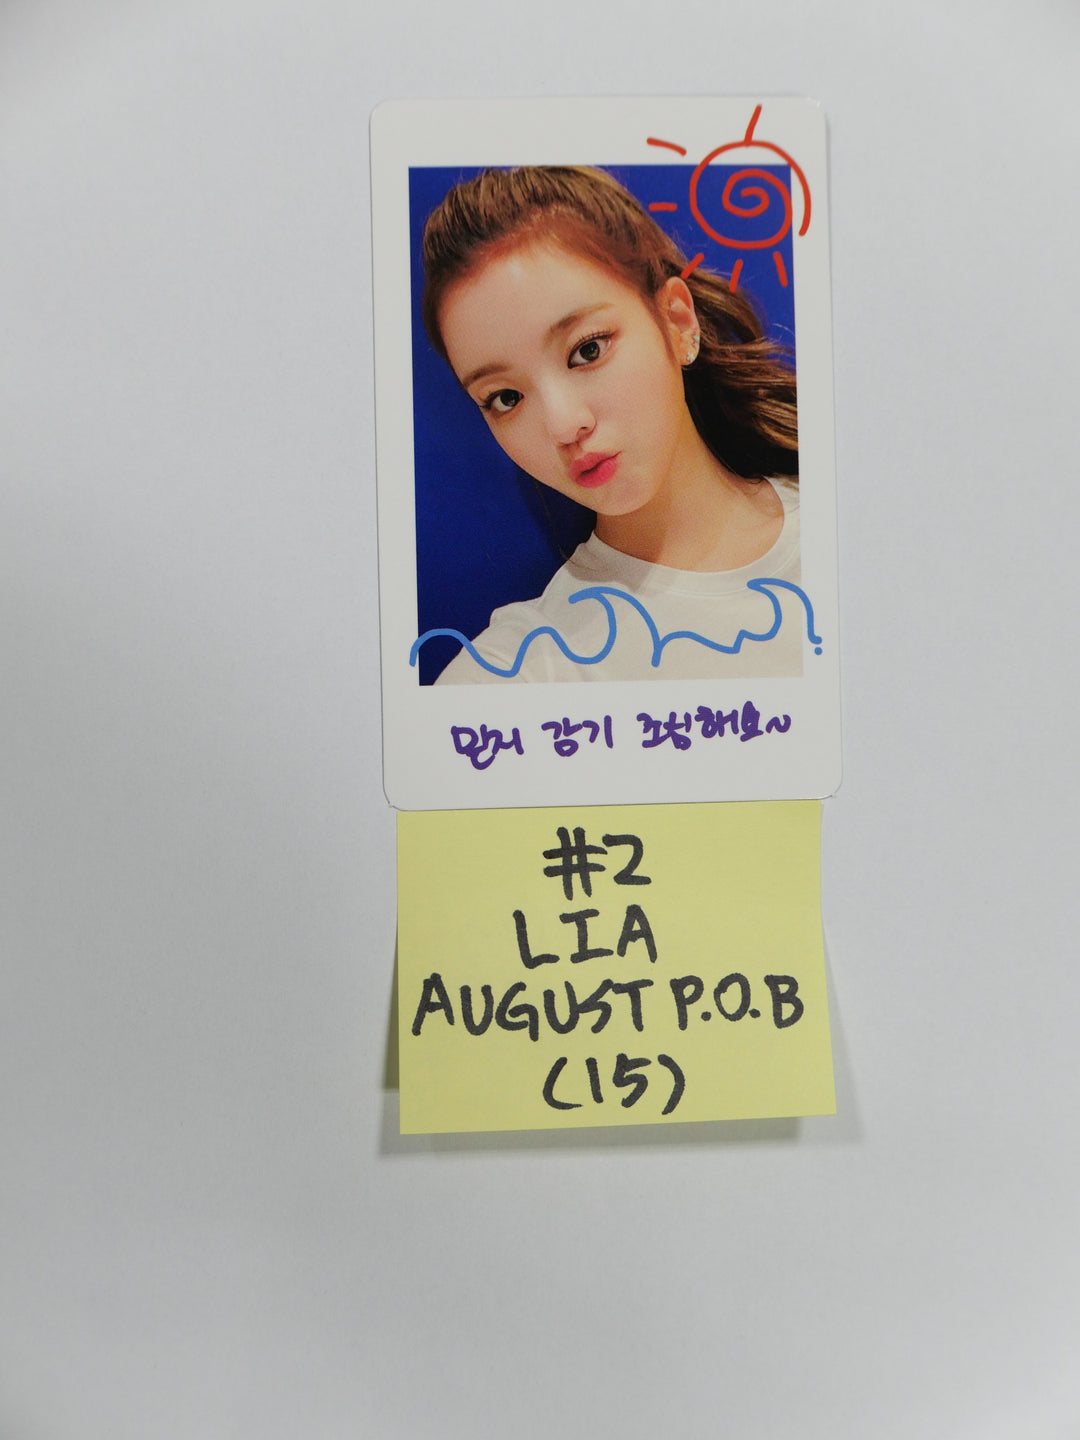 Itzy - No Bad Days- August (My Summer Recipe) - Pre-order Benefit Polaroid Photocard